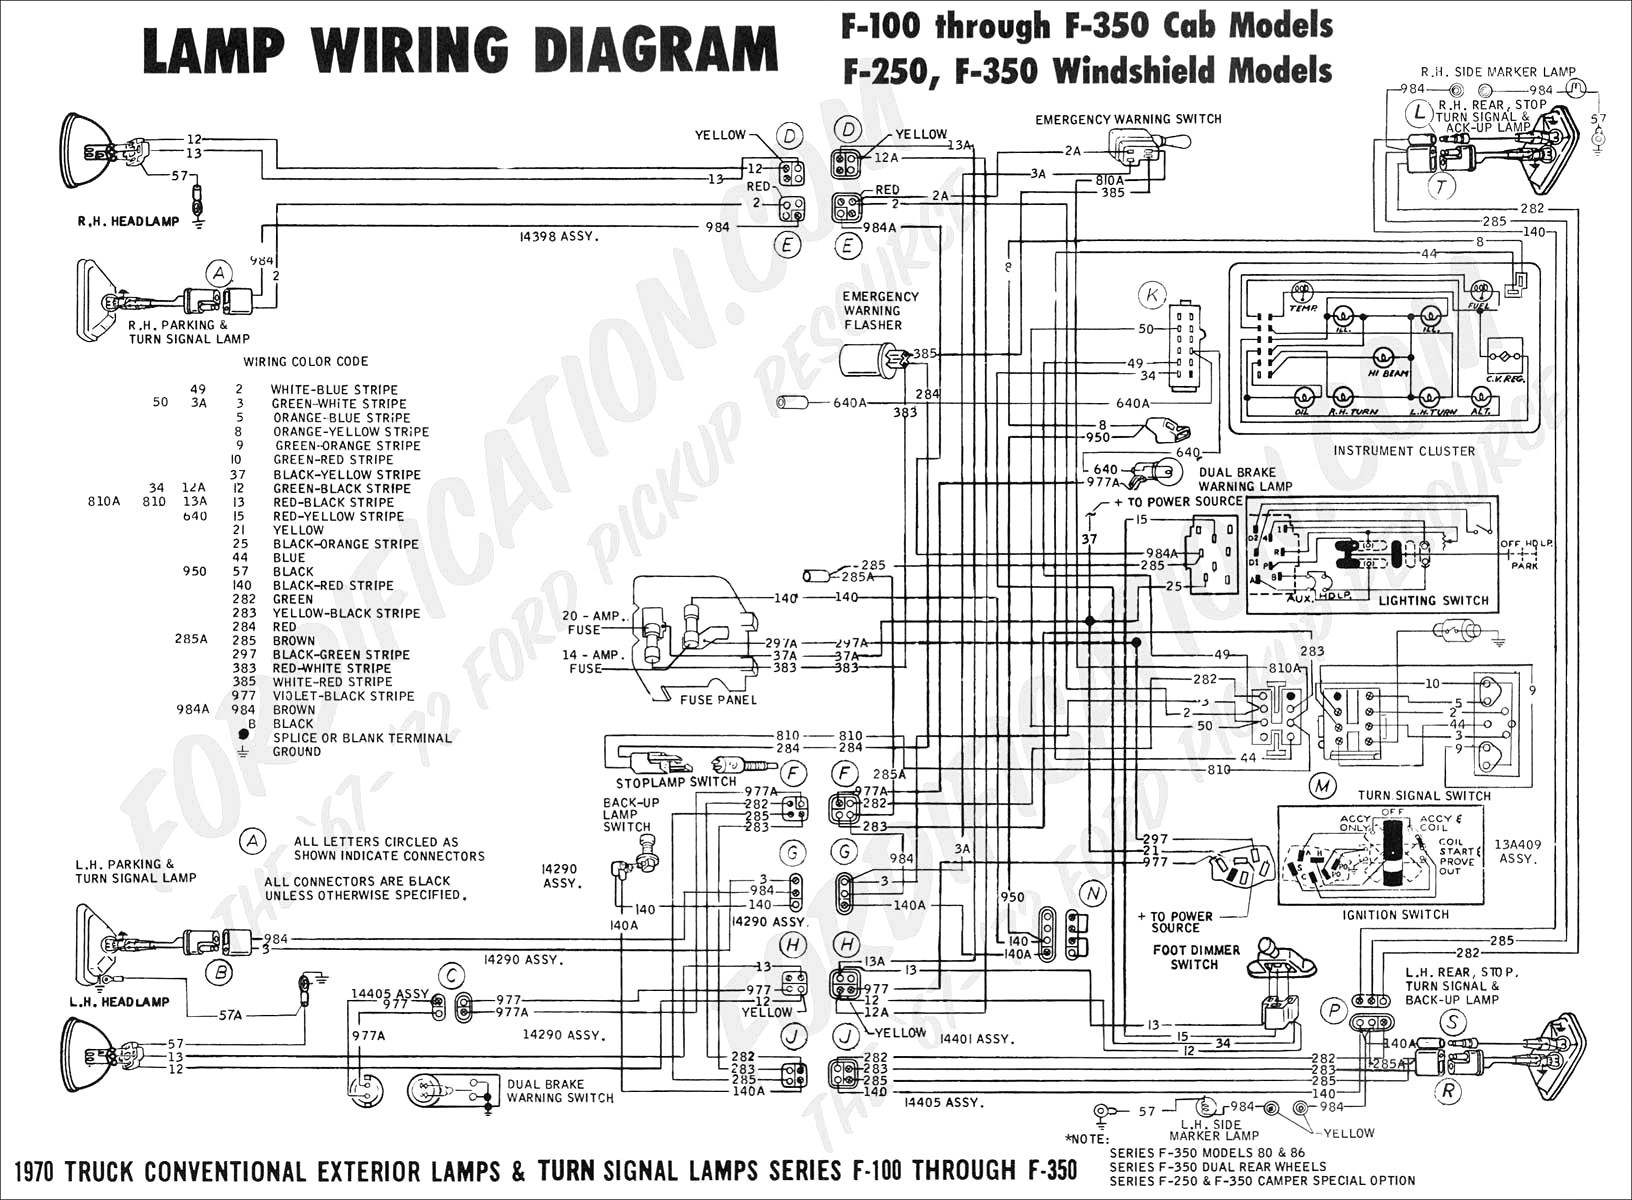 1937 Ford Vin Number Location 1965 Mustang Wiring Diagram 1948 Ford